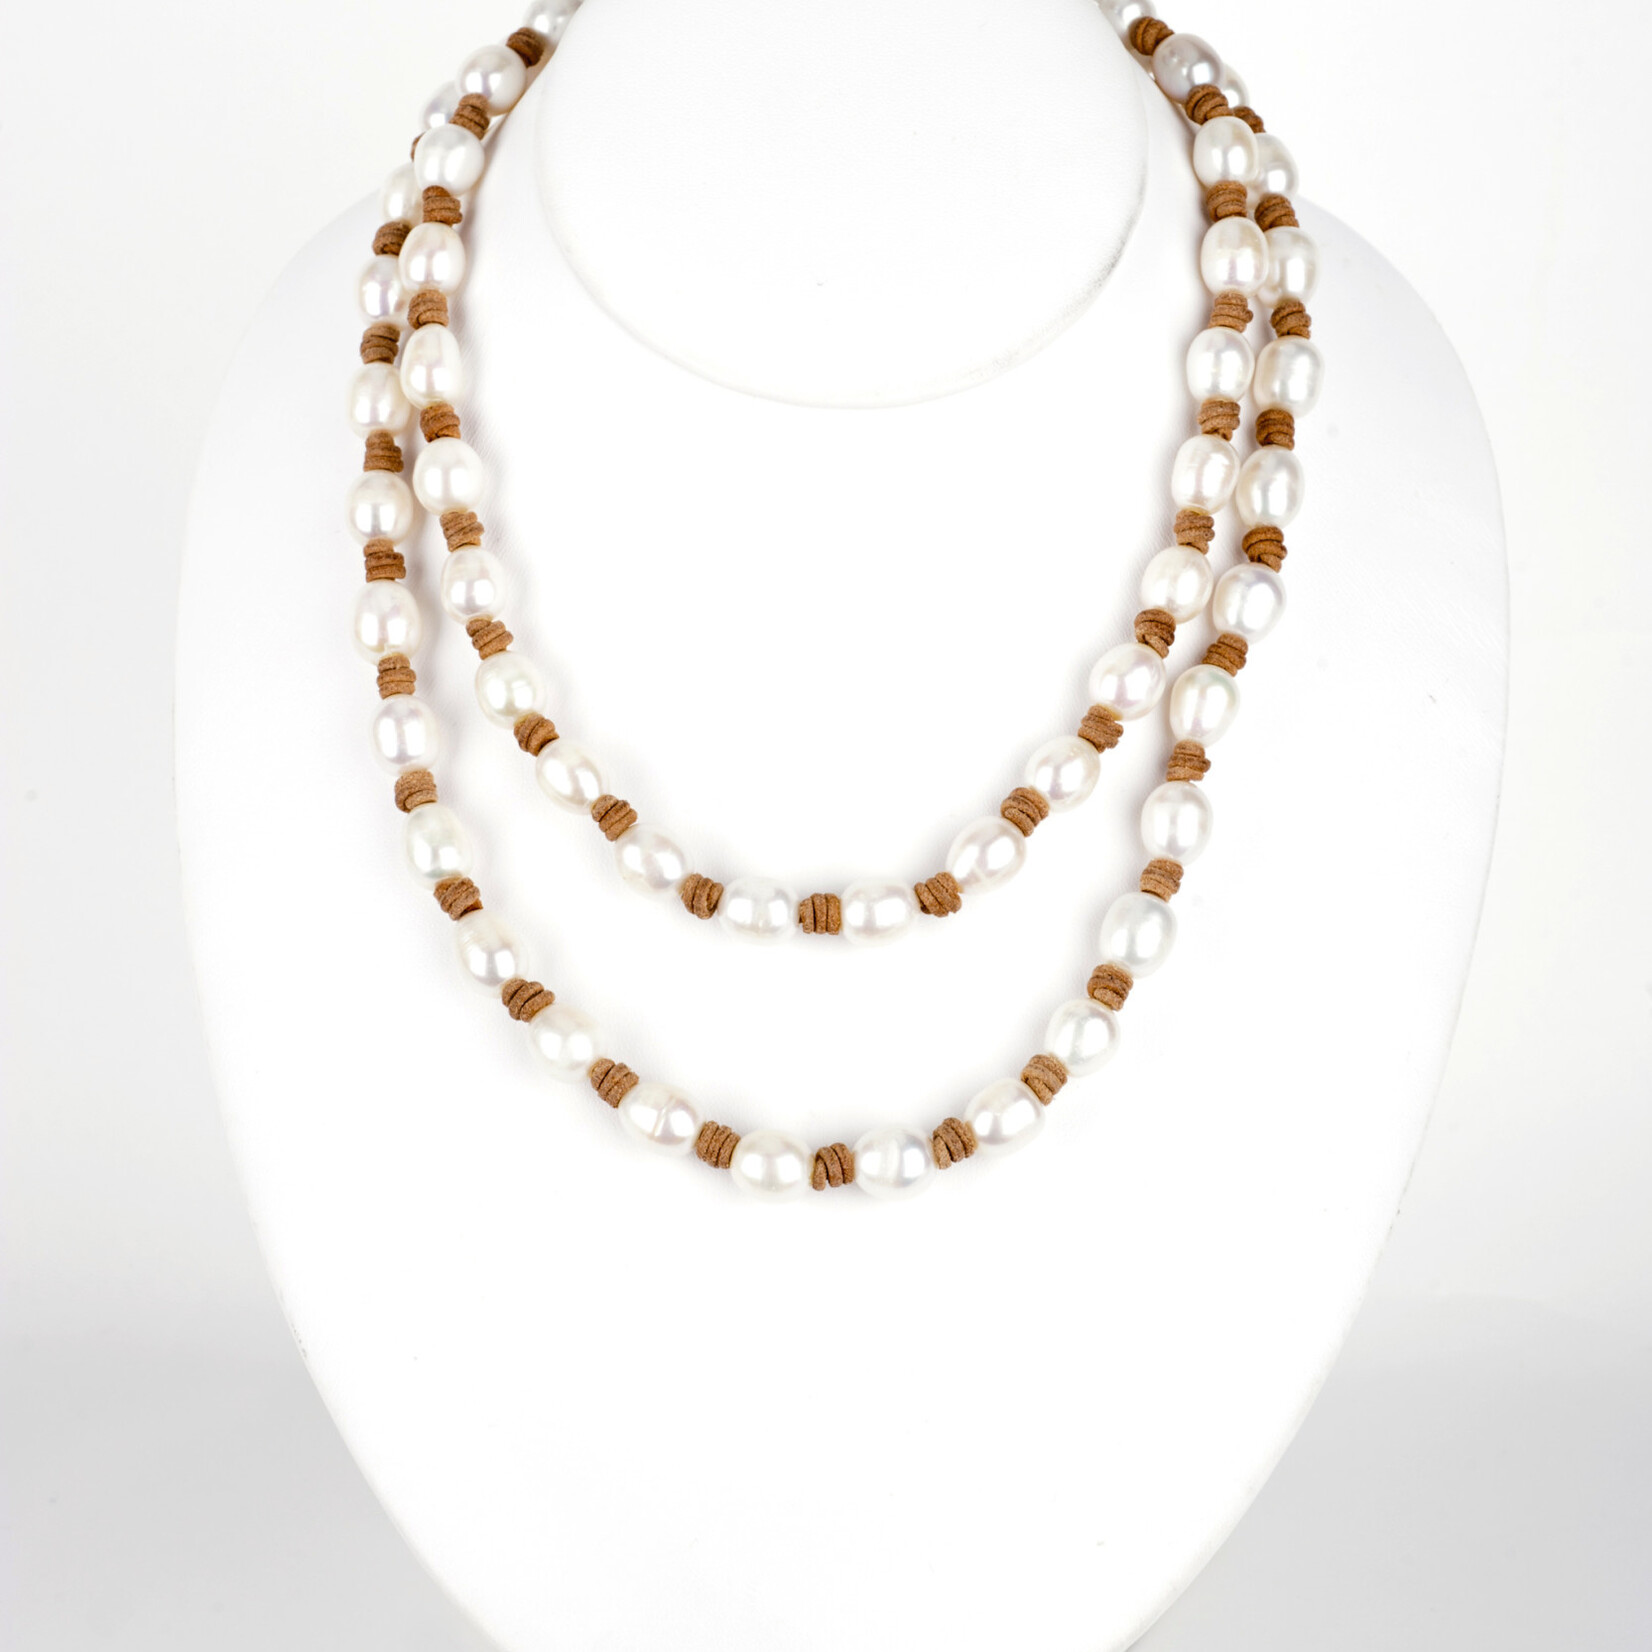 Mina Danielle Long Fresh Water Pearl Necklace on Tan Leather Cord